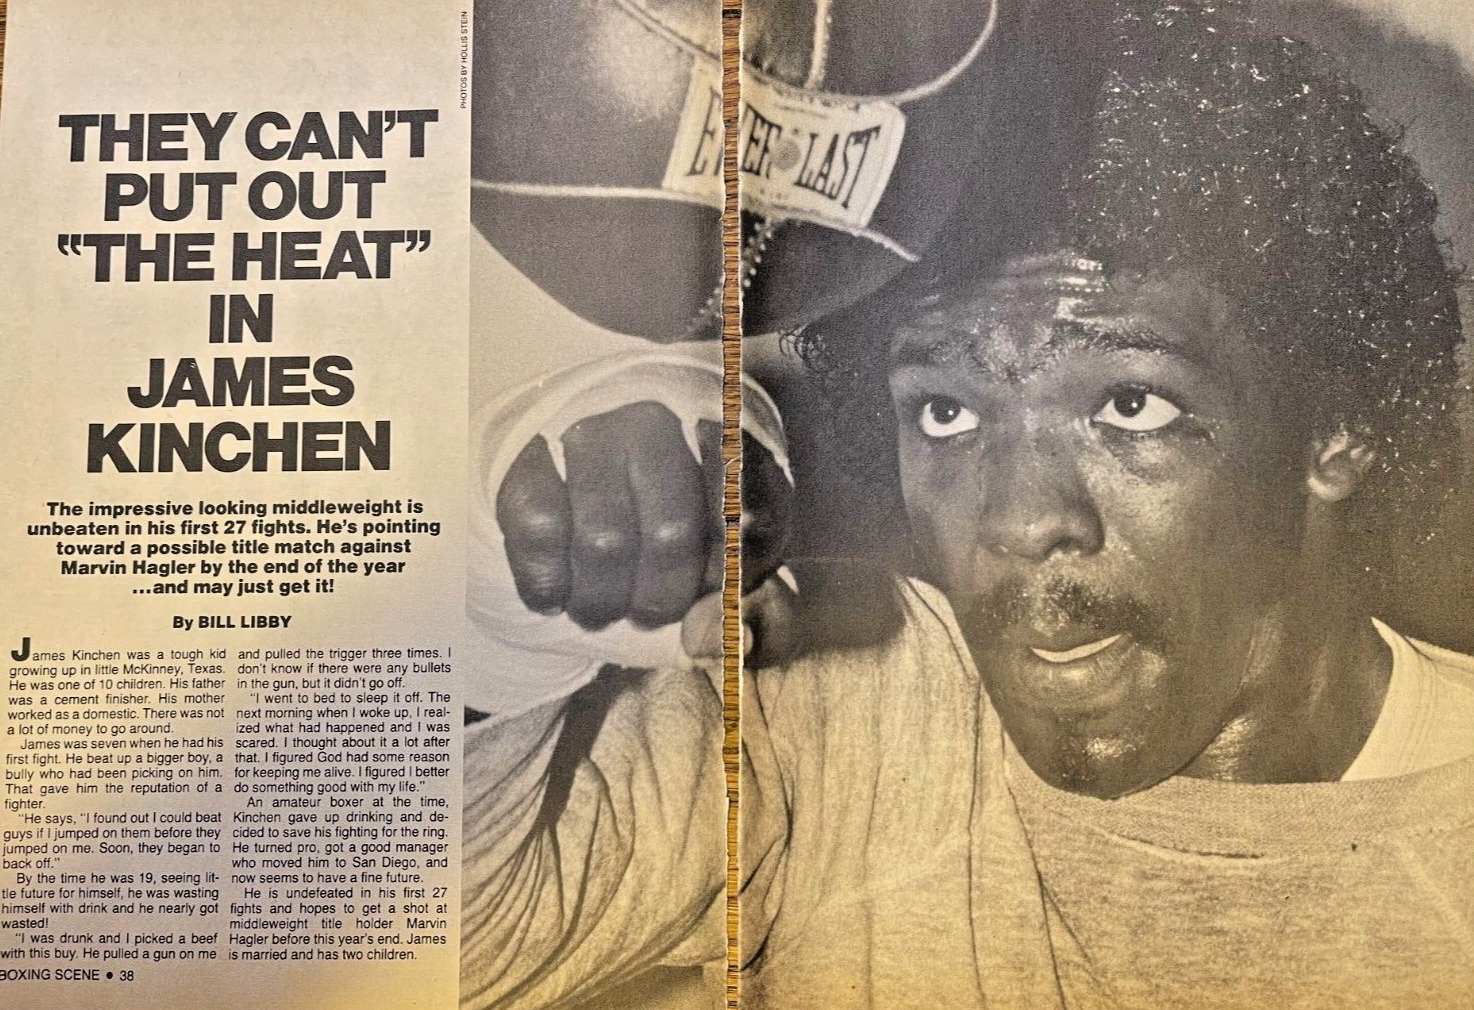 1983 Boxer James Kinchen illustrated